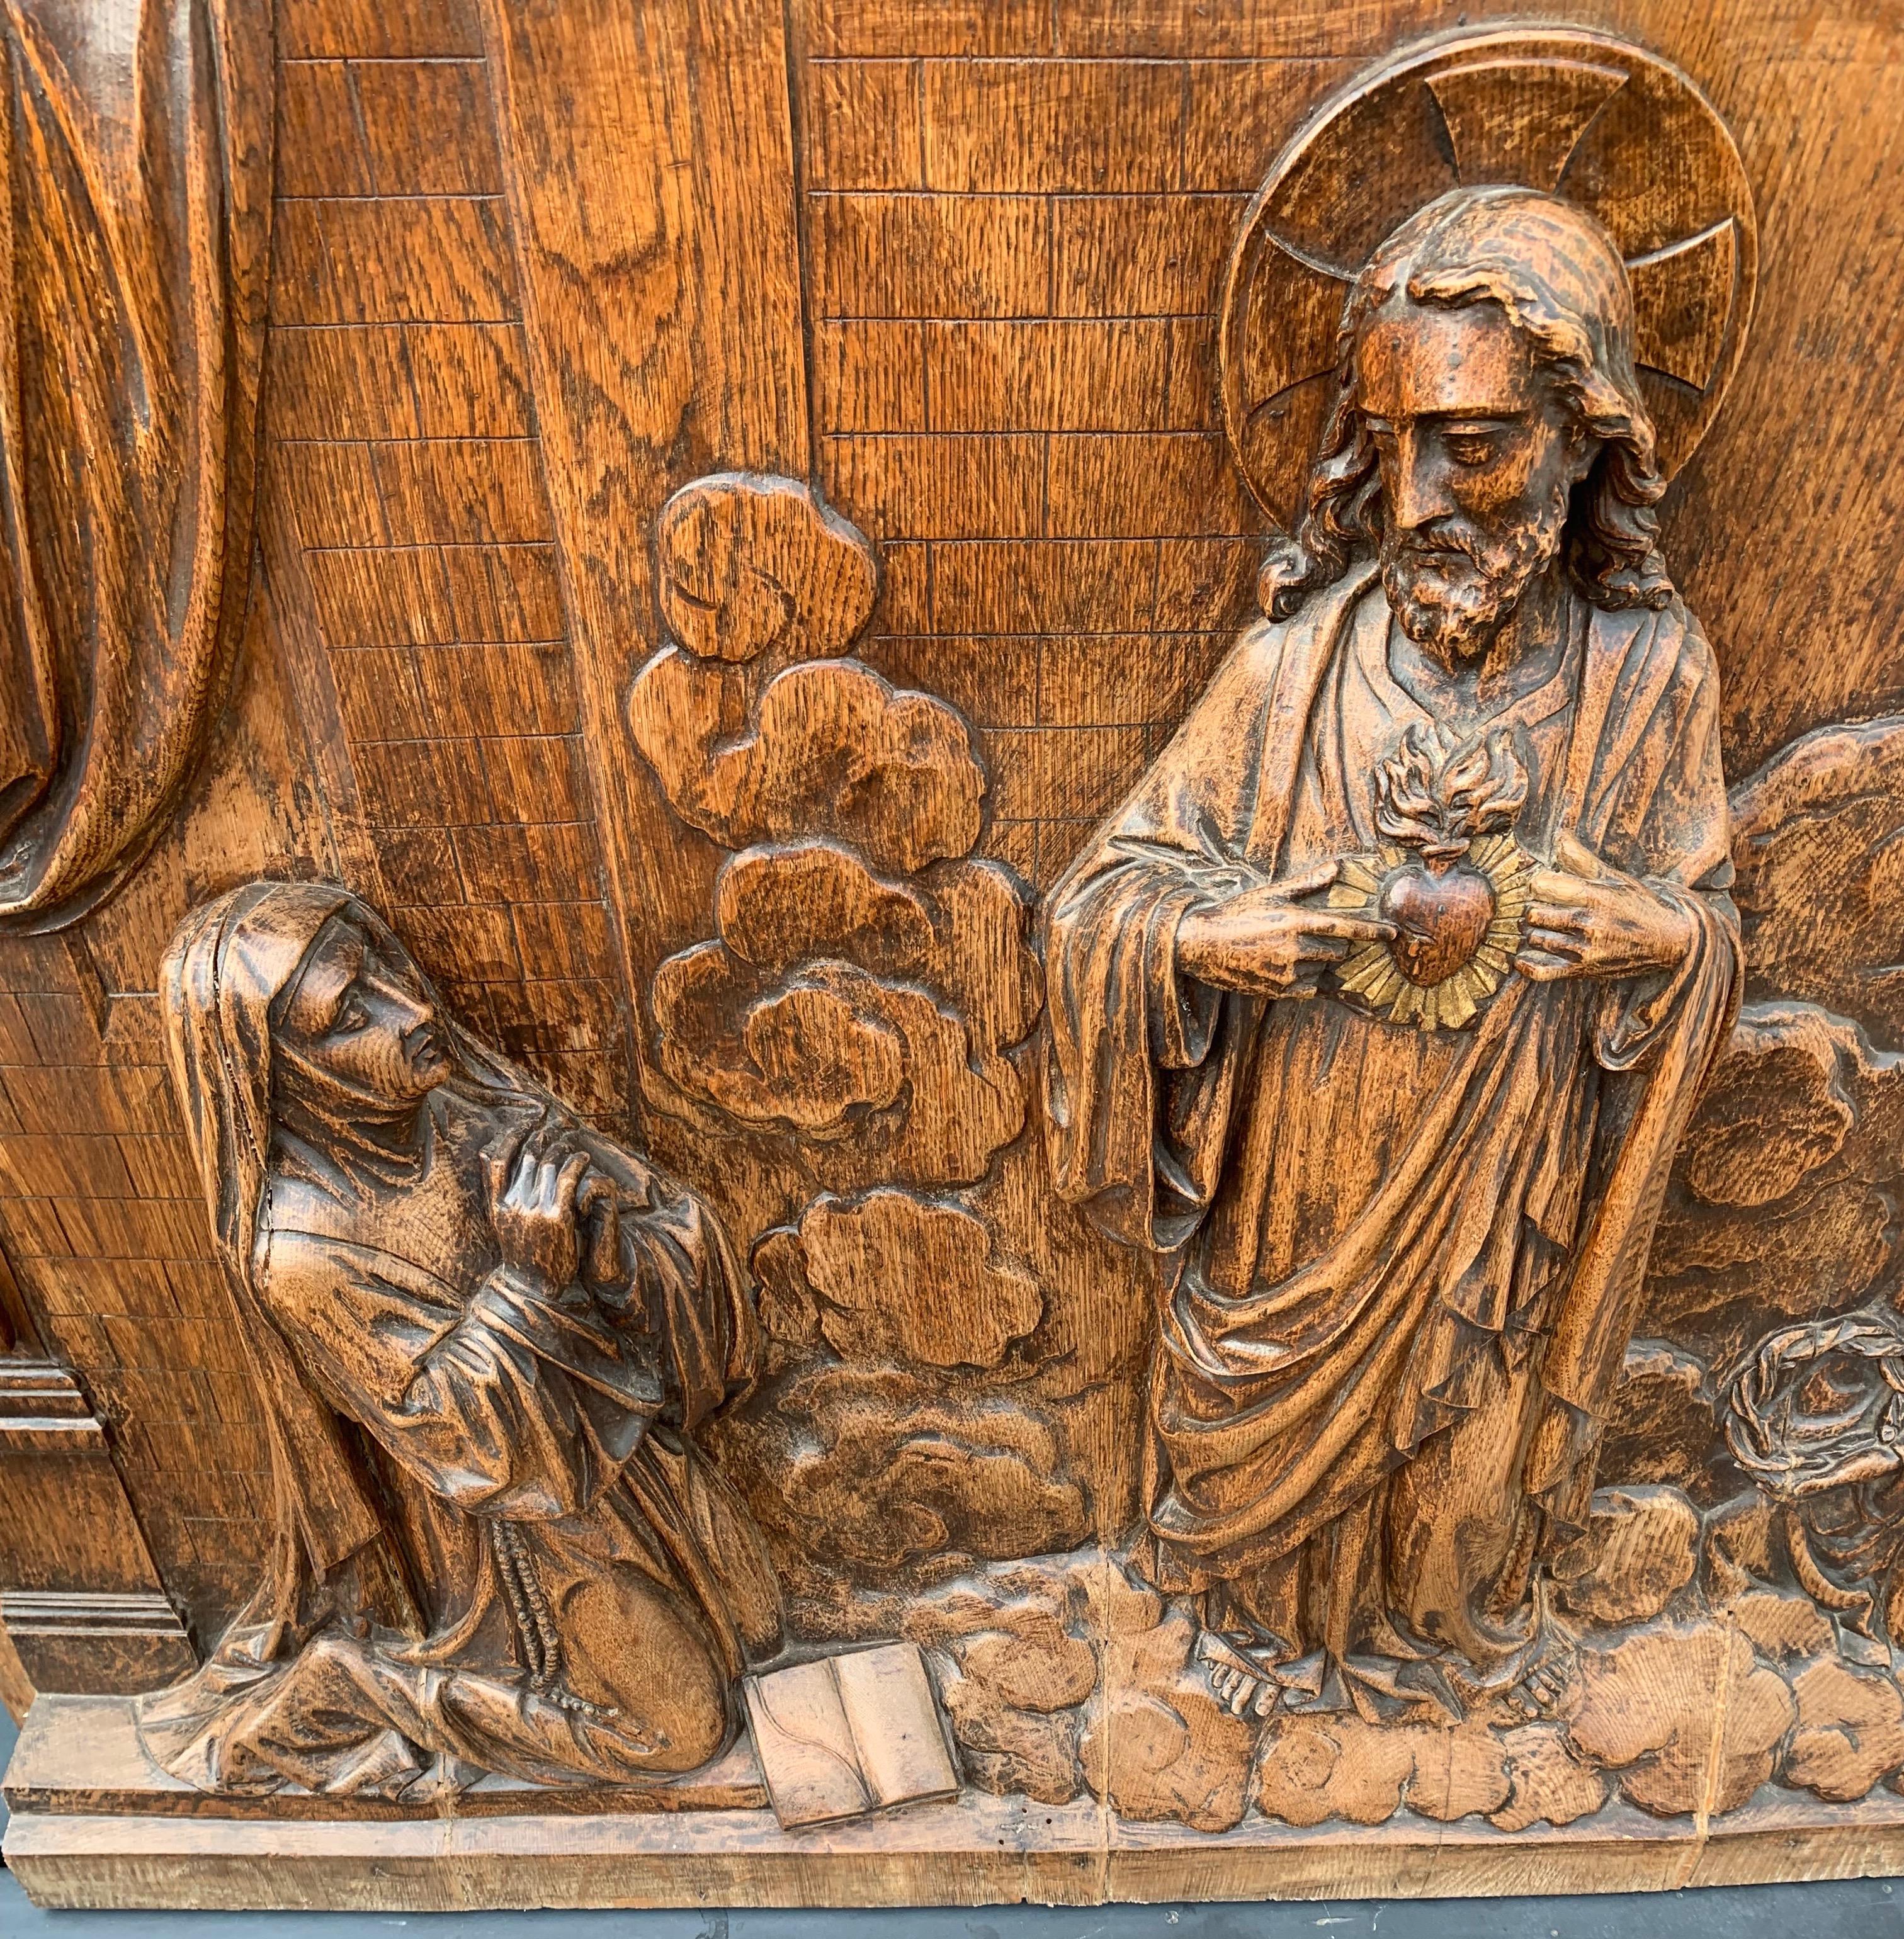 One of a kind, large and marvelous work of religious art.

With thanks to one of our honorable Frater clients we have learned that this unique and marvelously hand carved wall sculpture is a carving depicting the famous apparition of Jesus to the